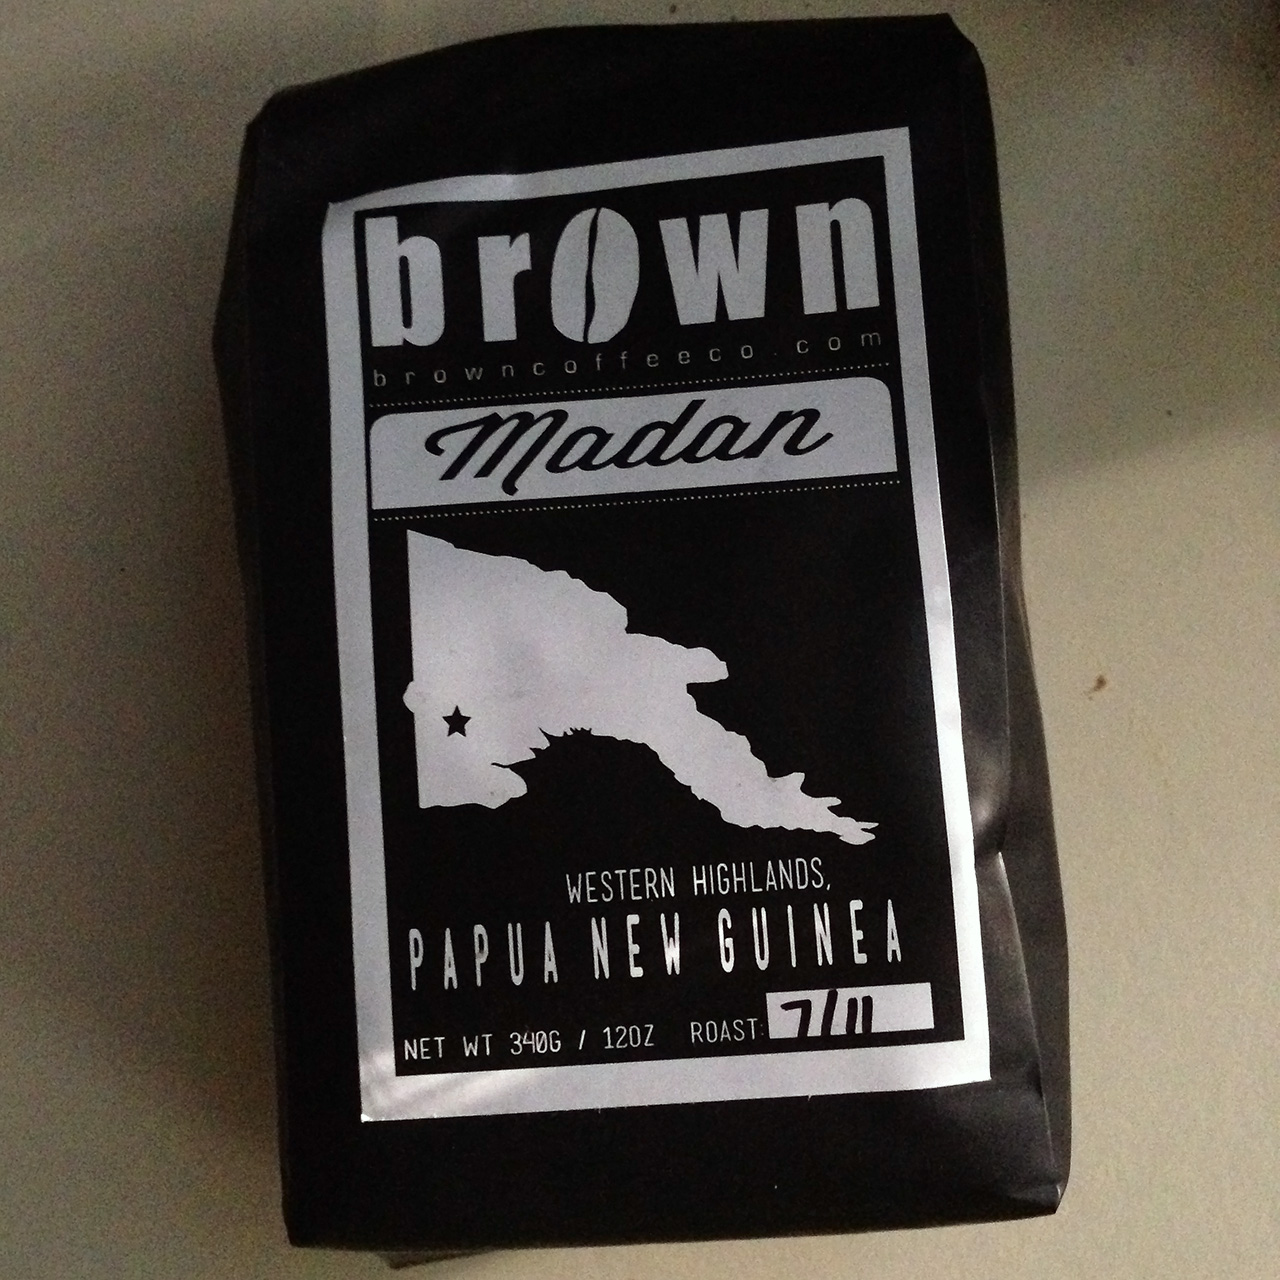 Madan from Brown Coffee Co.